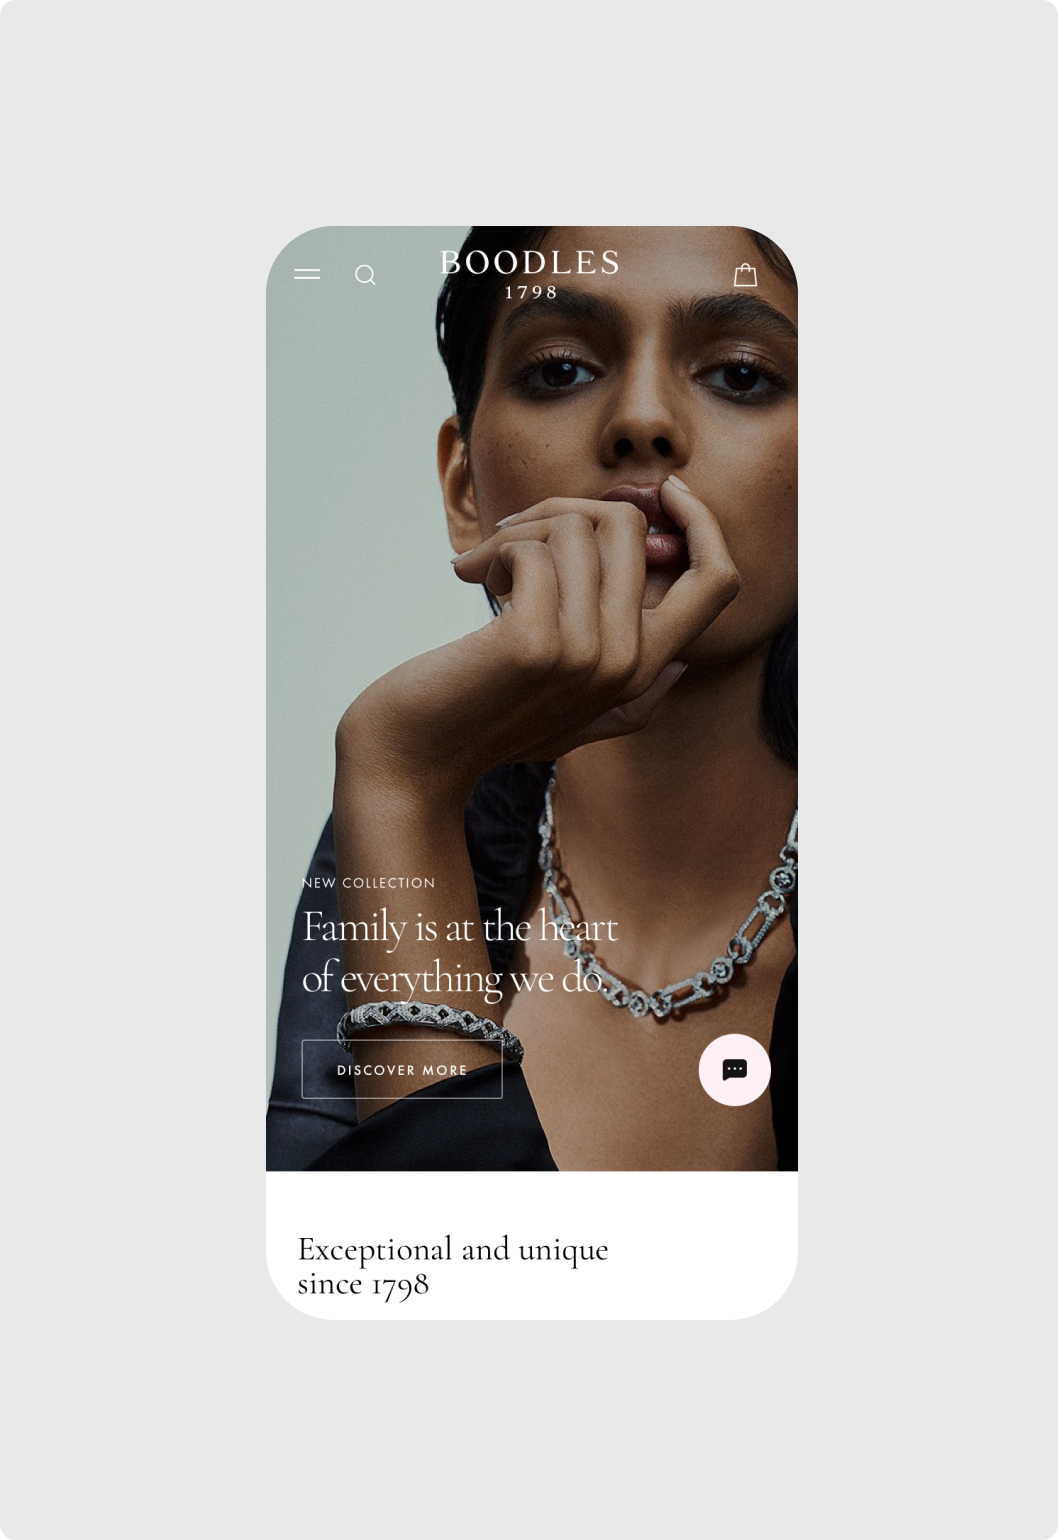 Boodles homepage mobile